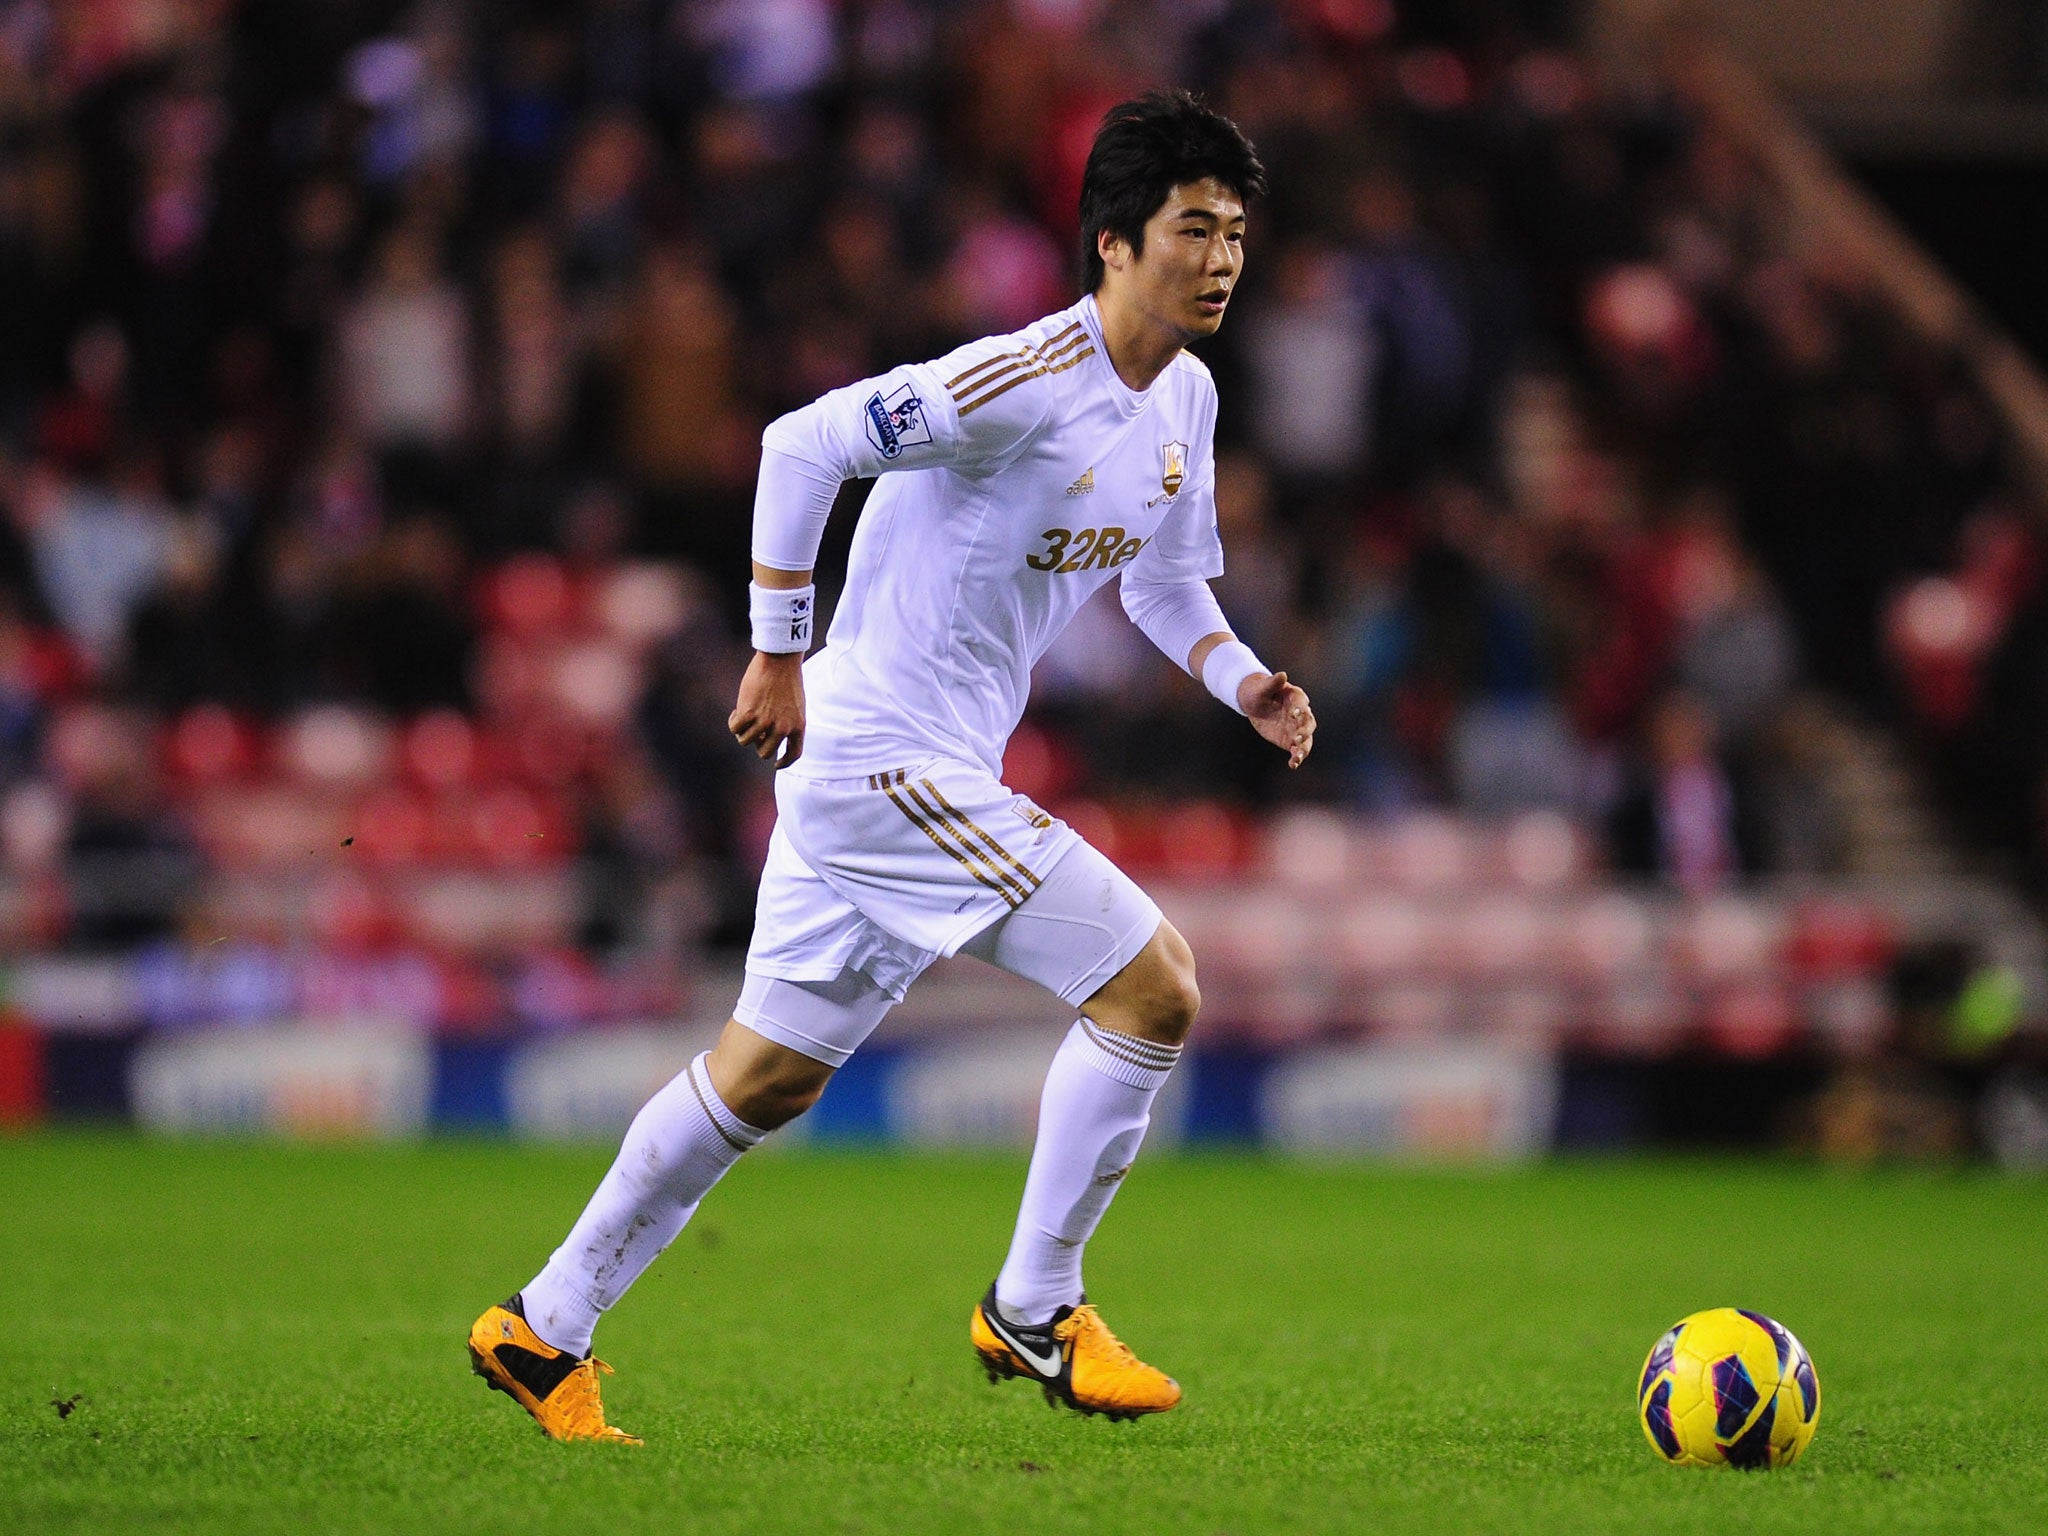 Swansea City player Ki Sung-Yeung in action during the Barclays Premier League match between Sunderland and Swansea City